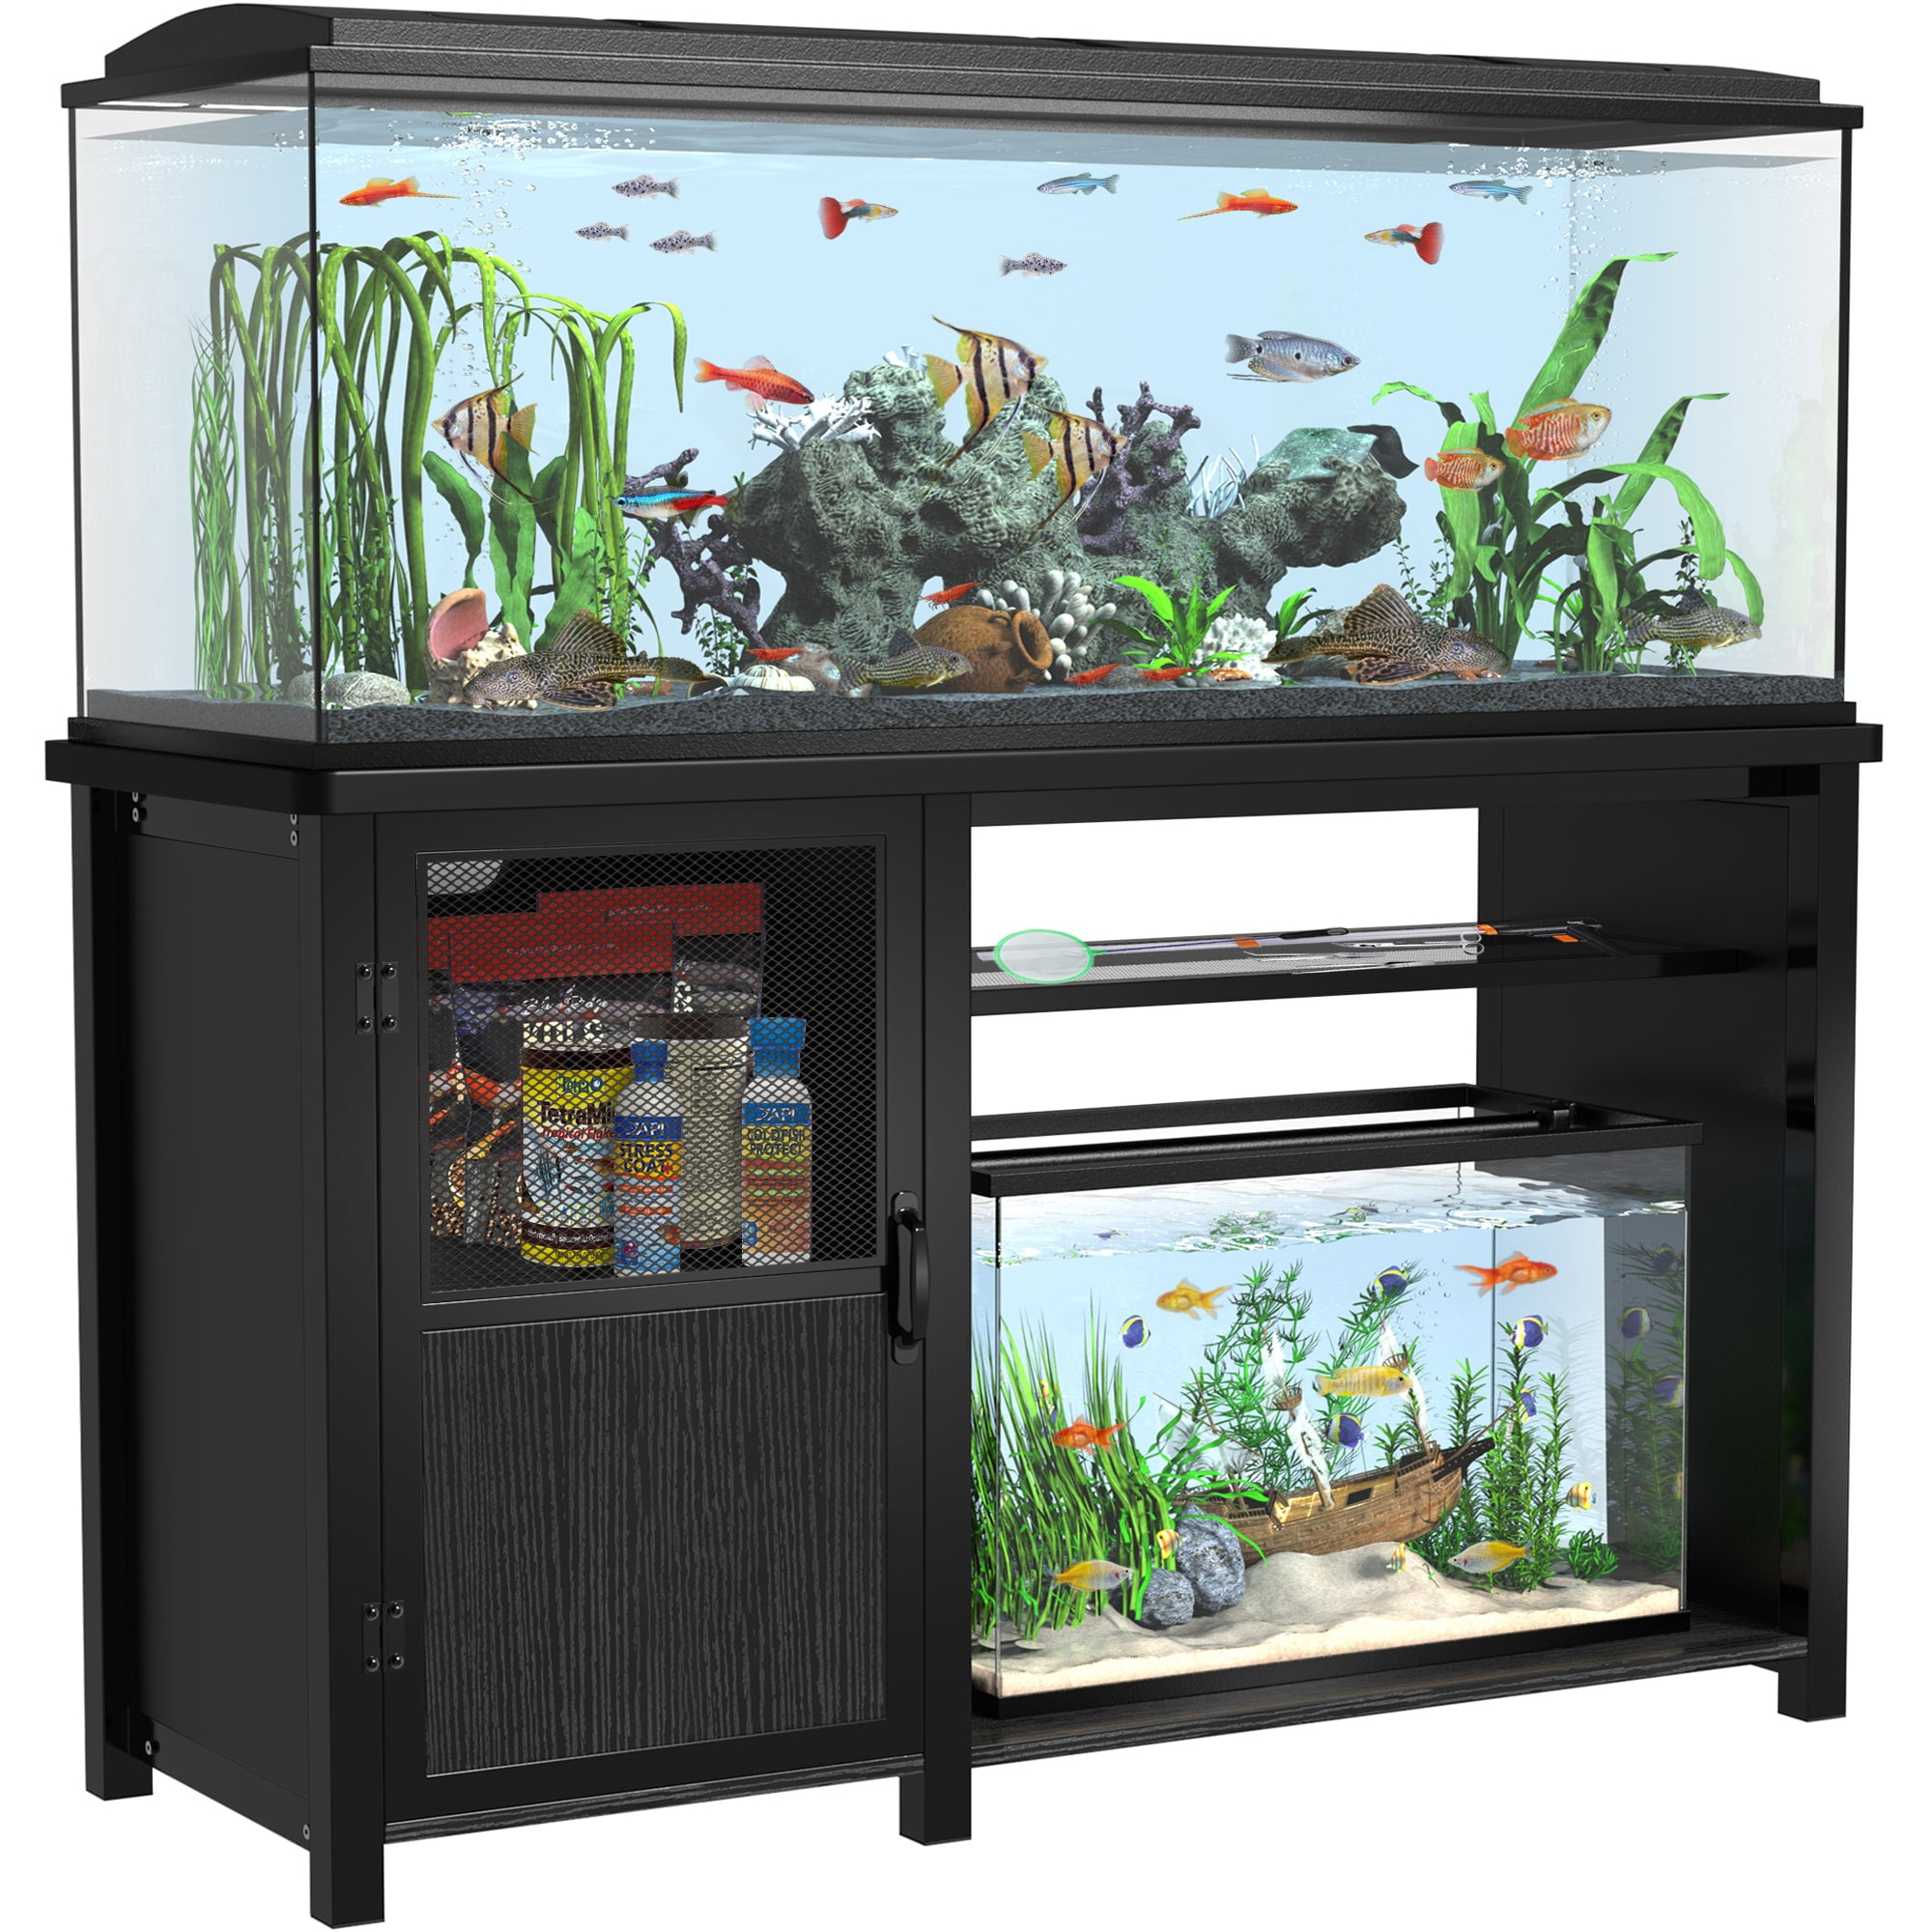 GDLF 55-75 Gallon Fish Tank Stand Heavy Duty Metal Aquarium Stand with  Cabinet,52L*19.68 